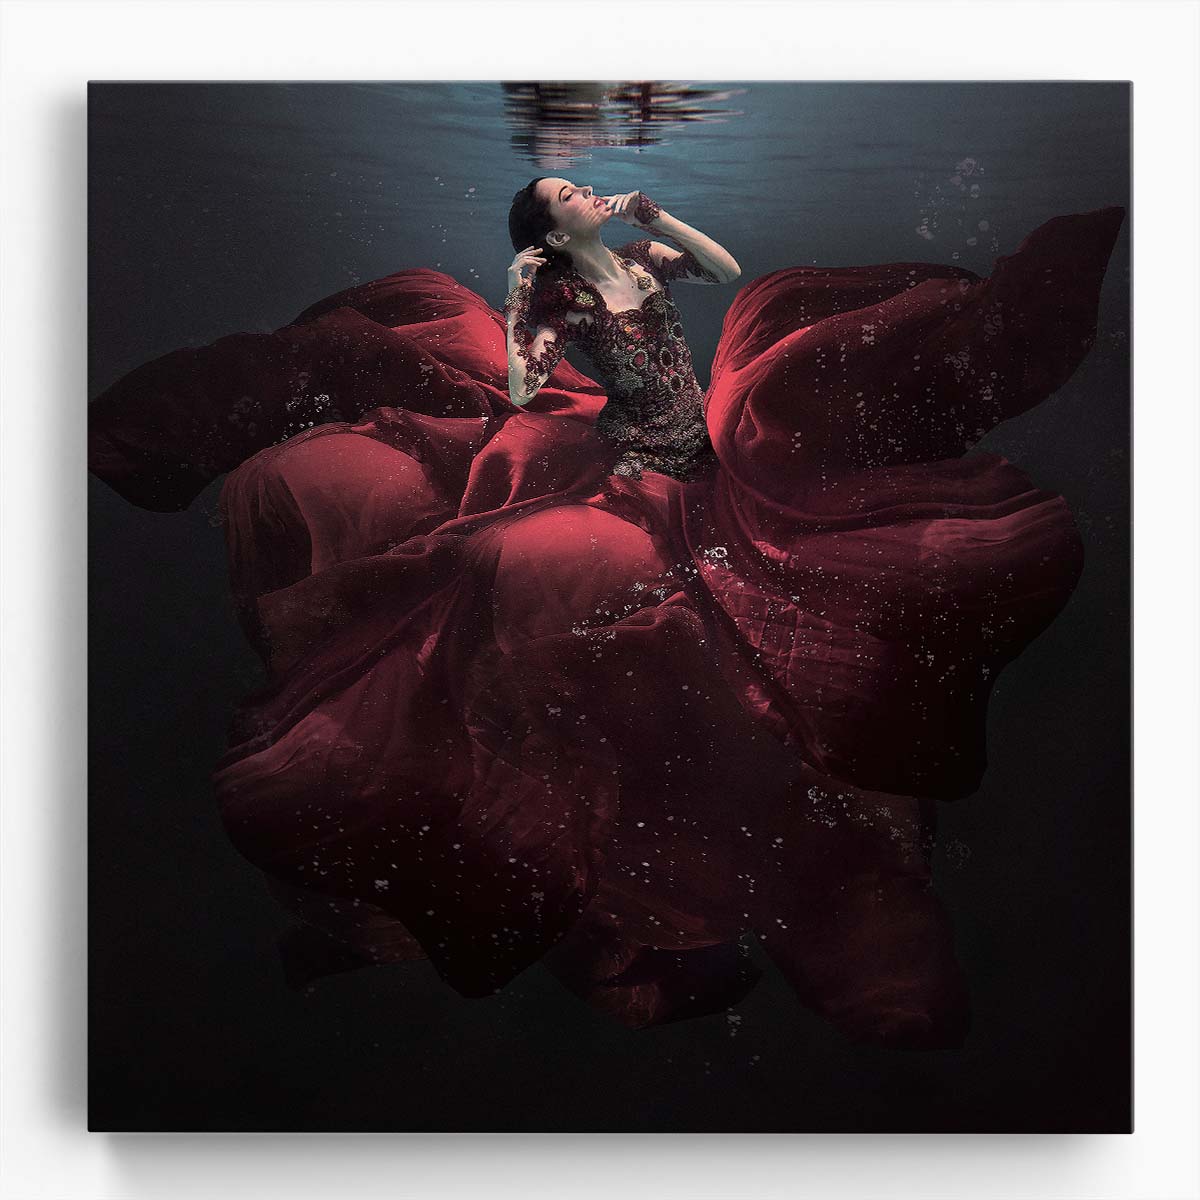 Enchanting Lady in Red with Roses Underwater Photography Wall Art by Luxuriance Designs. Made in USA.